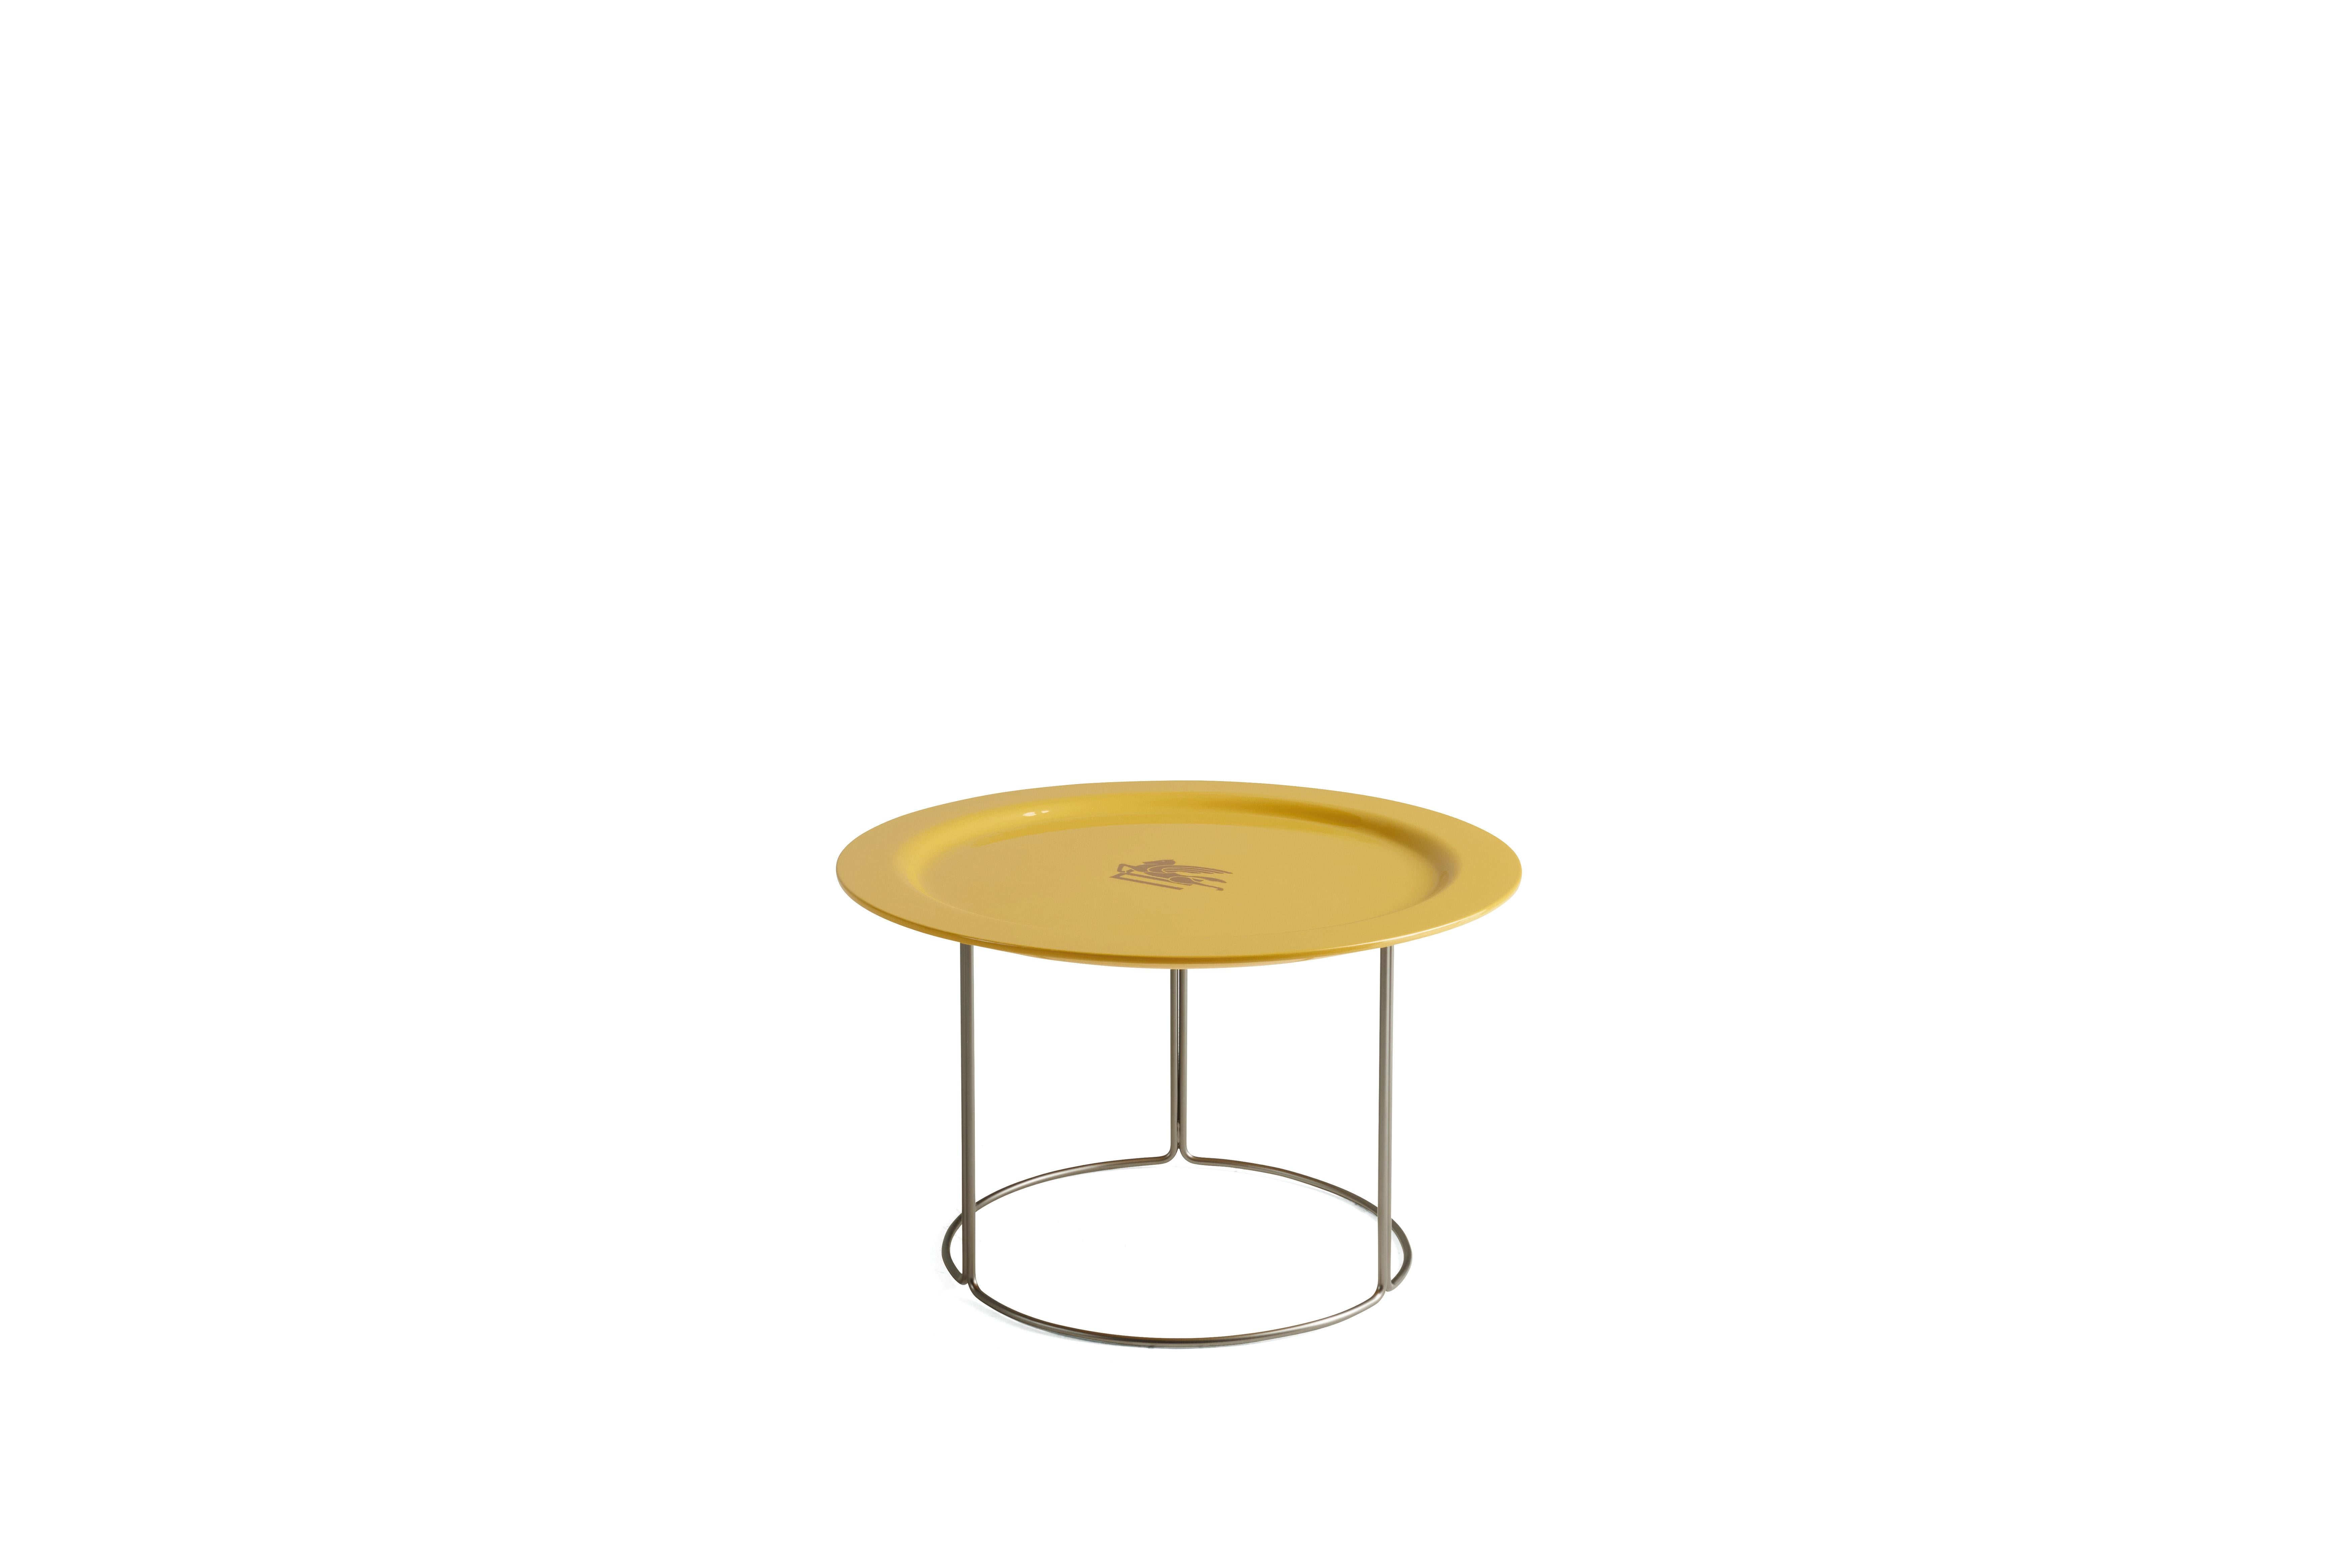 With their contemporary appeal, Lagoon coffee tables, available in different sizes and heights, allow the creation of functional and scenographic combinations in the living area. The minimalist structure is made up of curved metal pipes with a